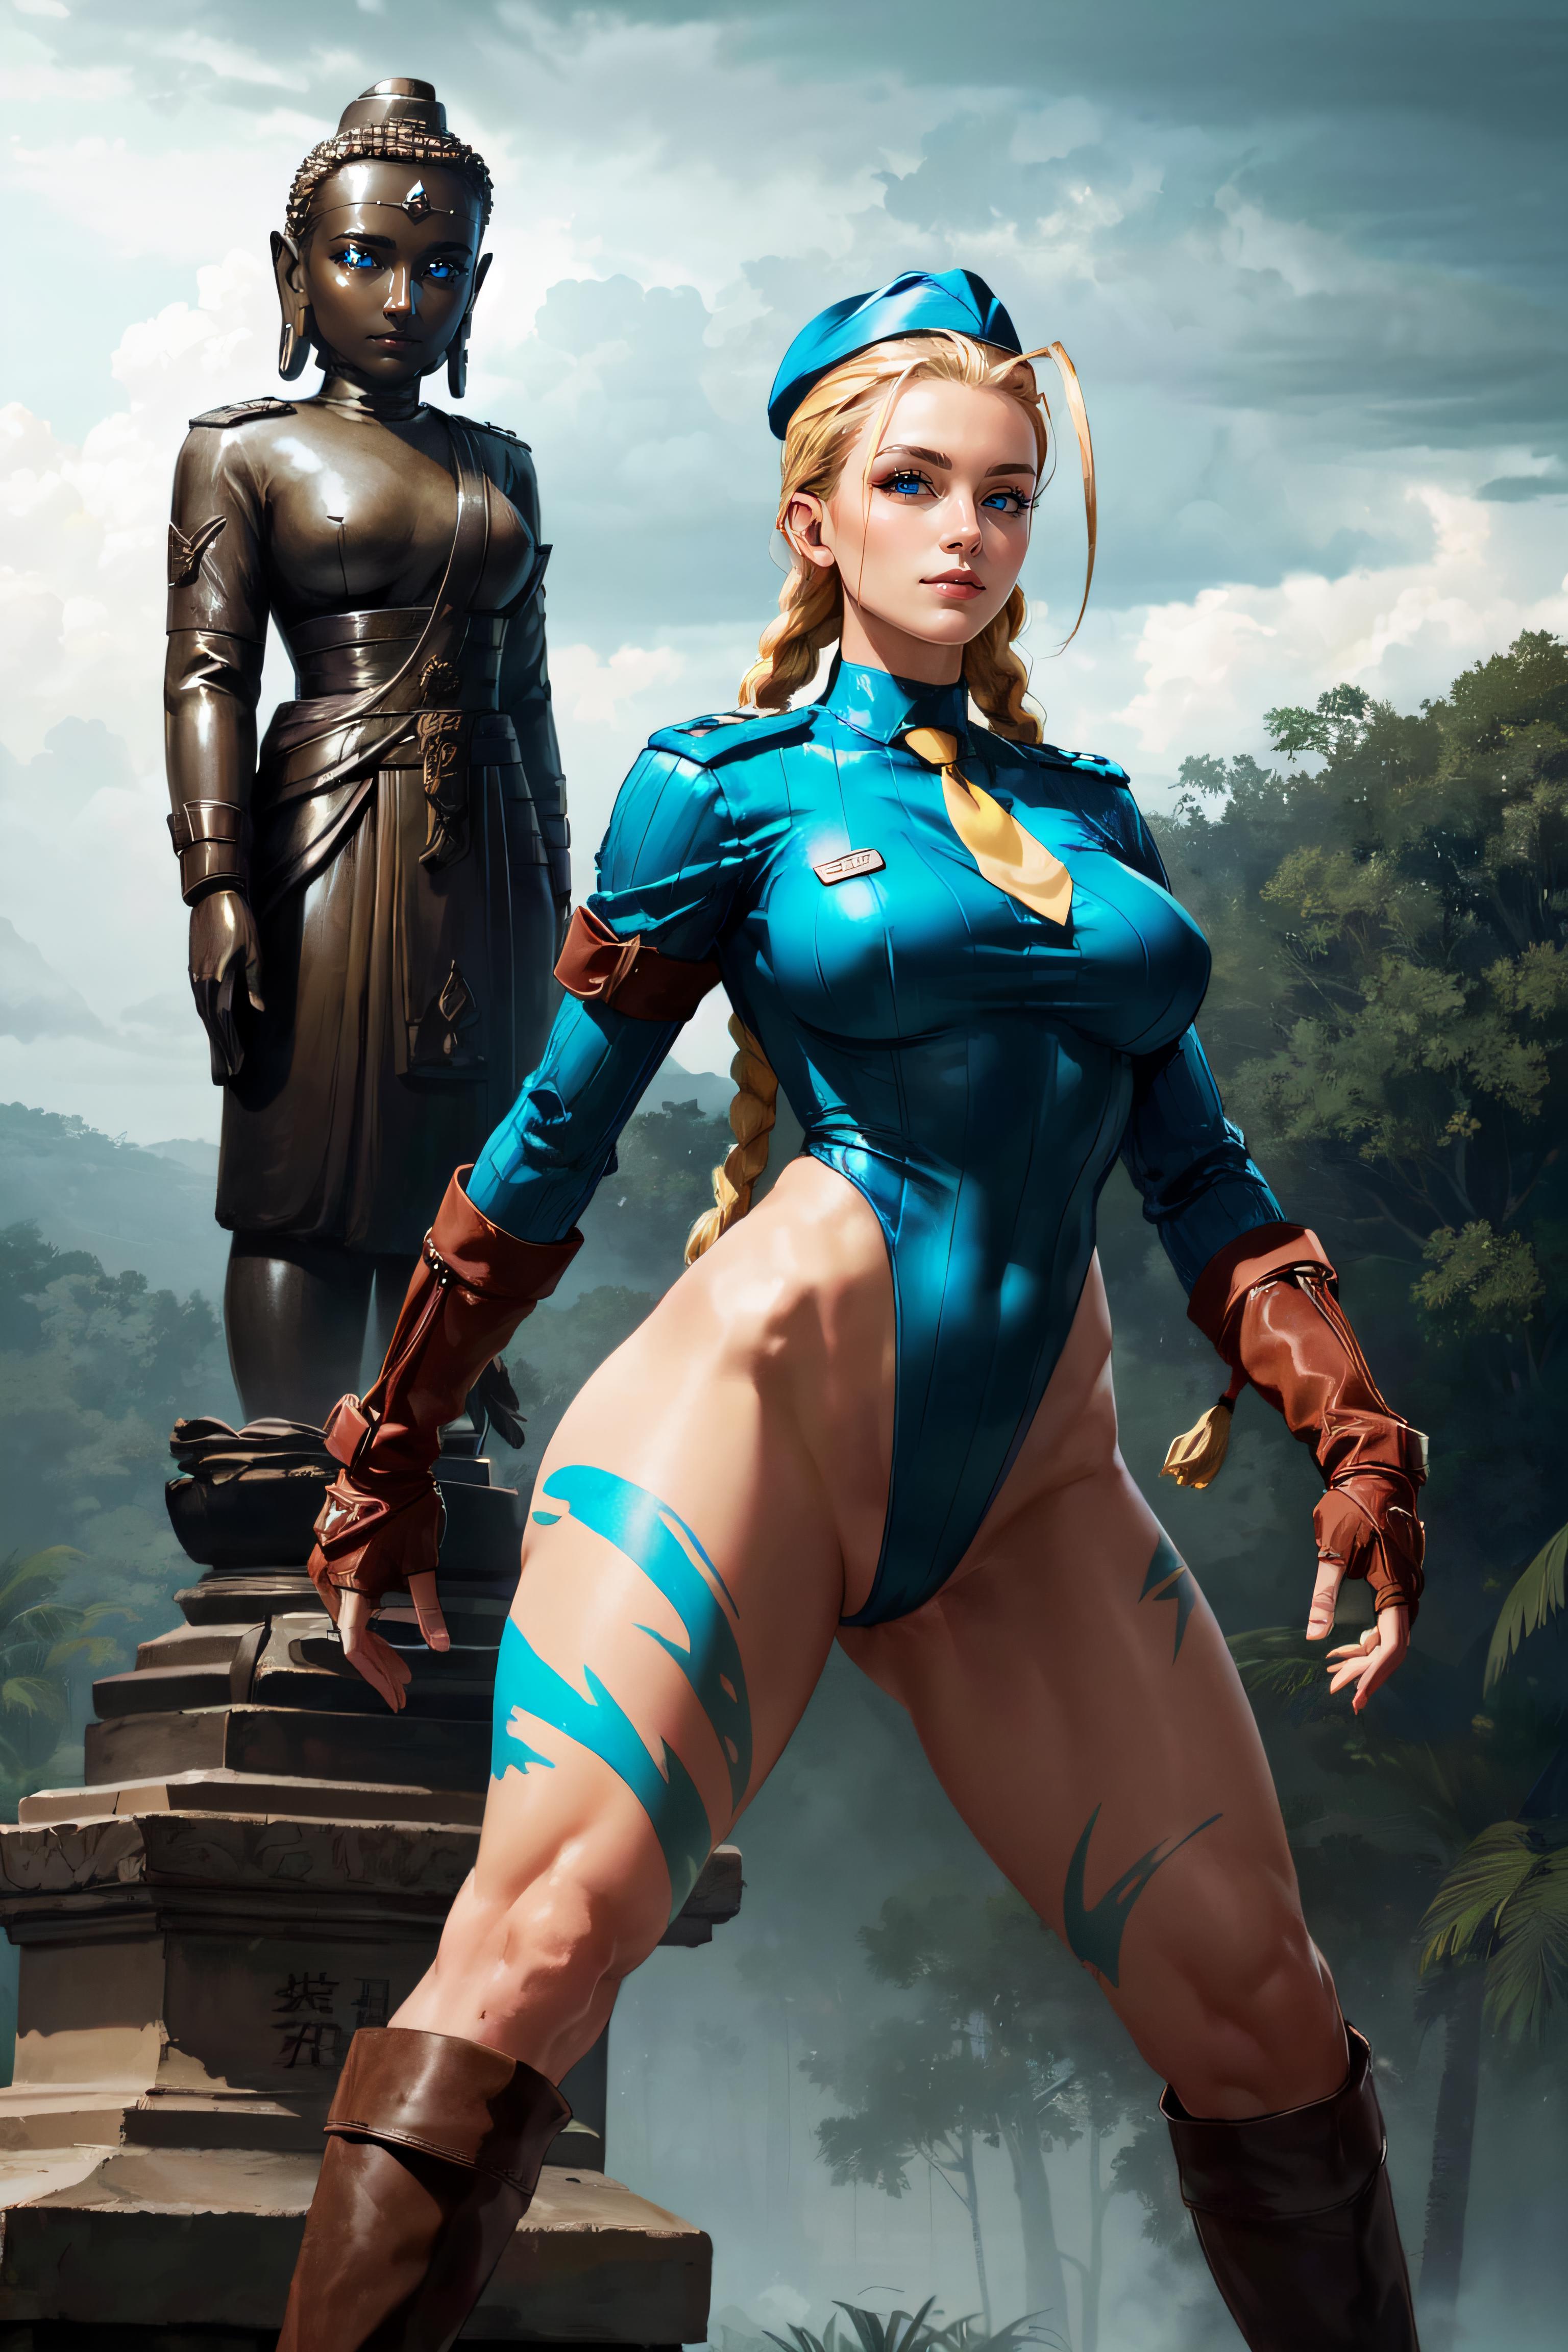 Cammy White キャミィ・ホワイト / Street Fighter image by betweenspectrums